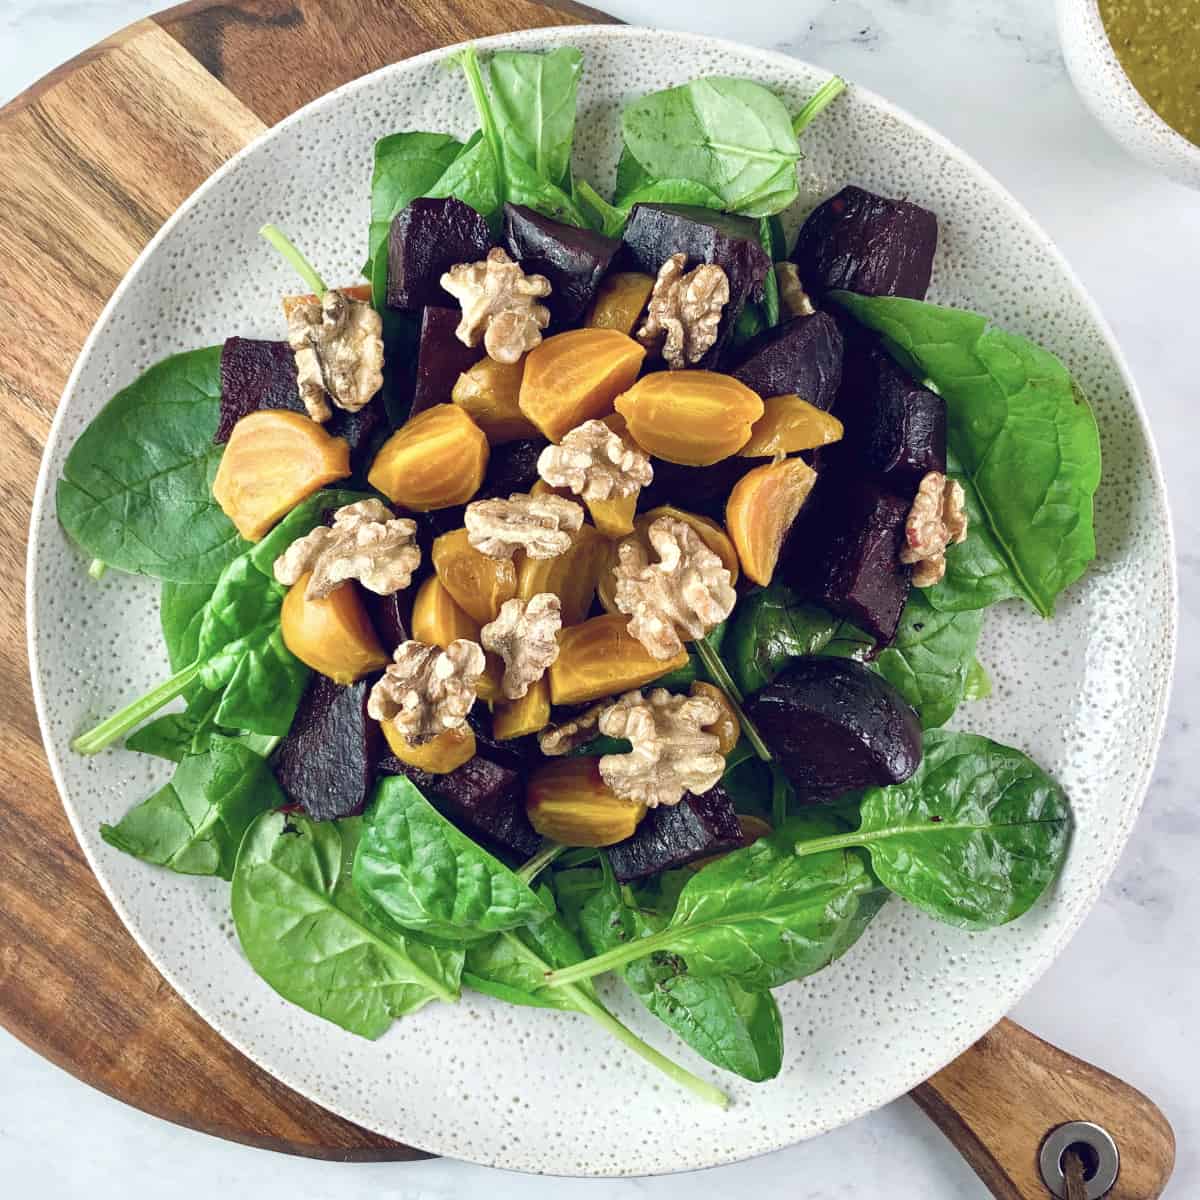 GOLDEN BEET SALAD WITH WALNUTS, SPINACH & HONEY MUSTARD DRESSING ON THE SIDE